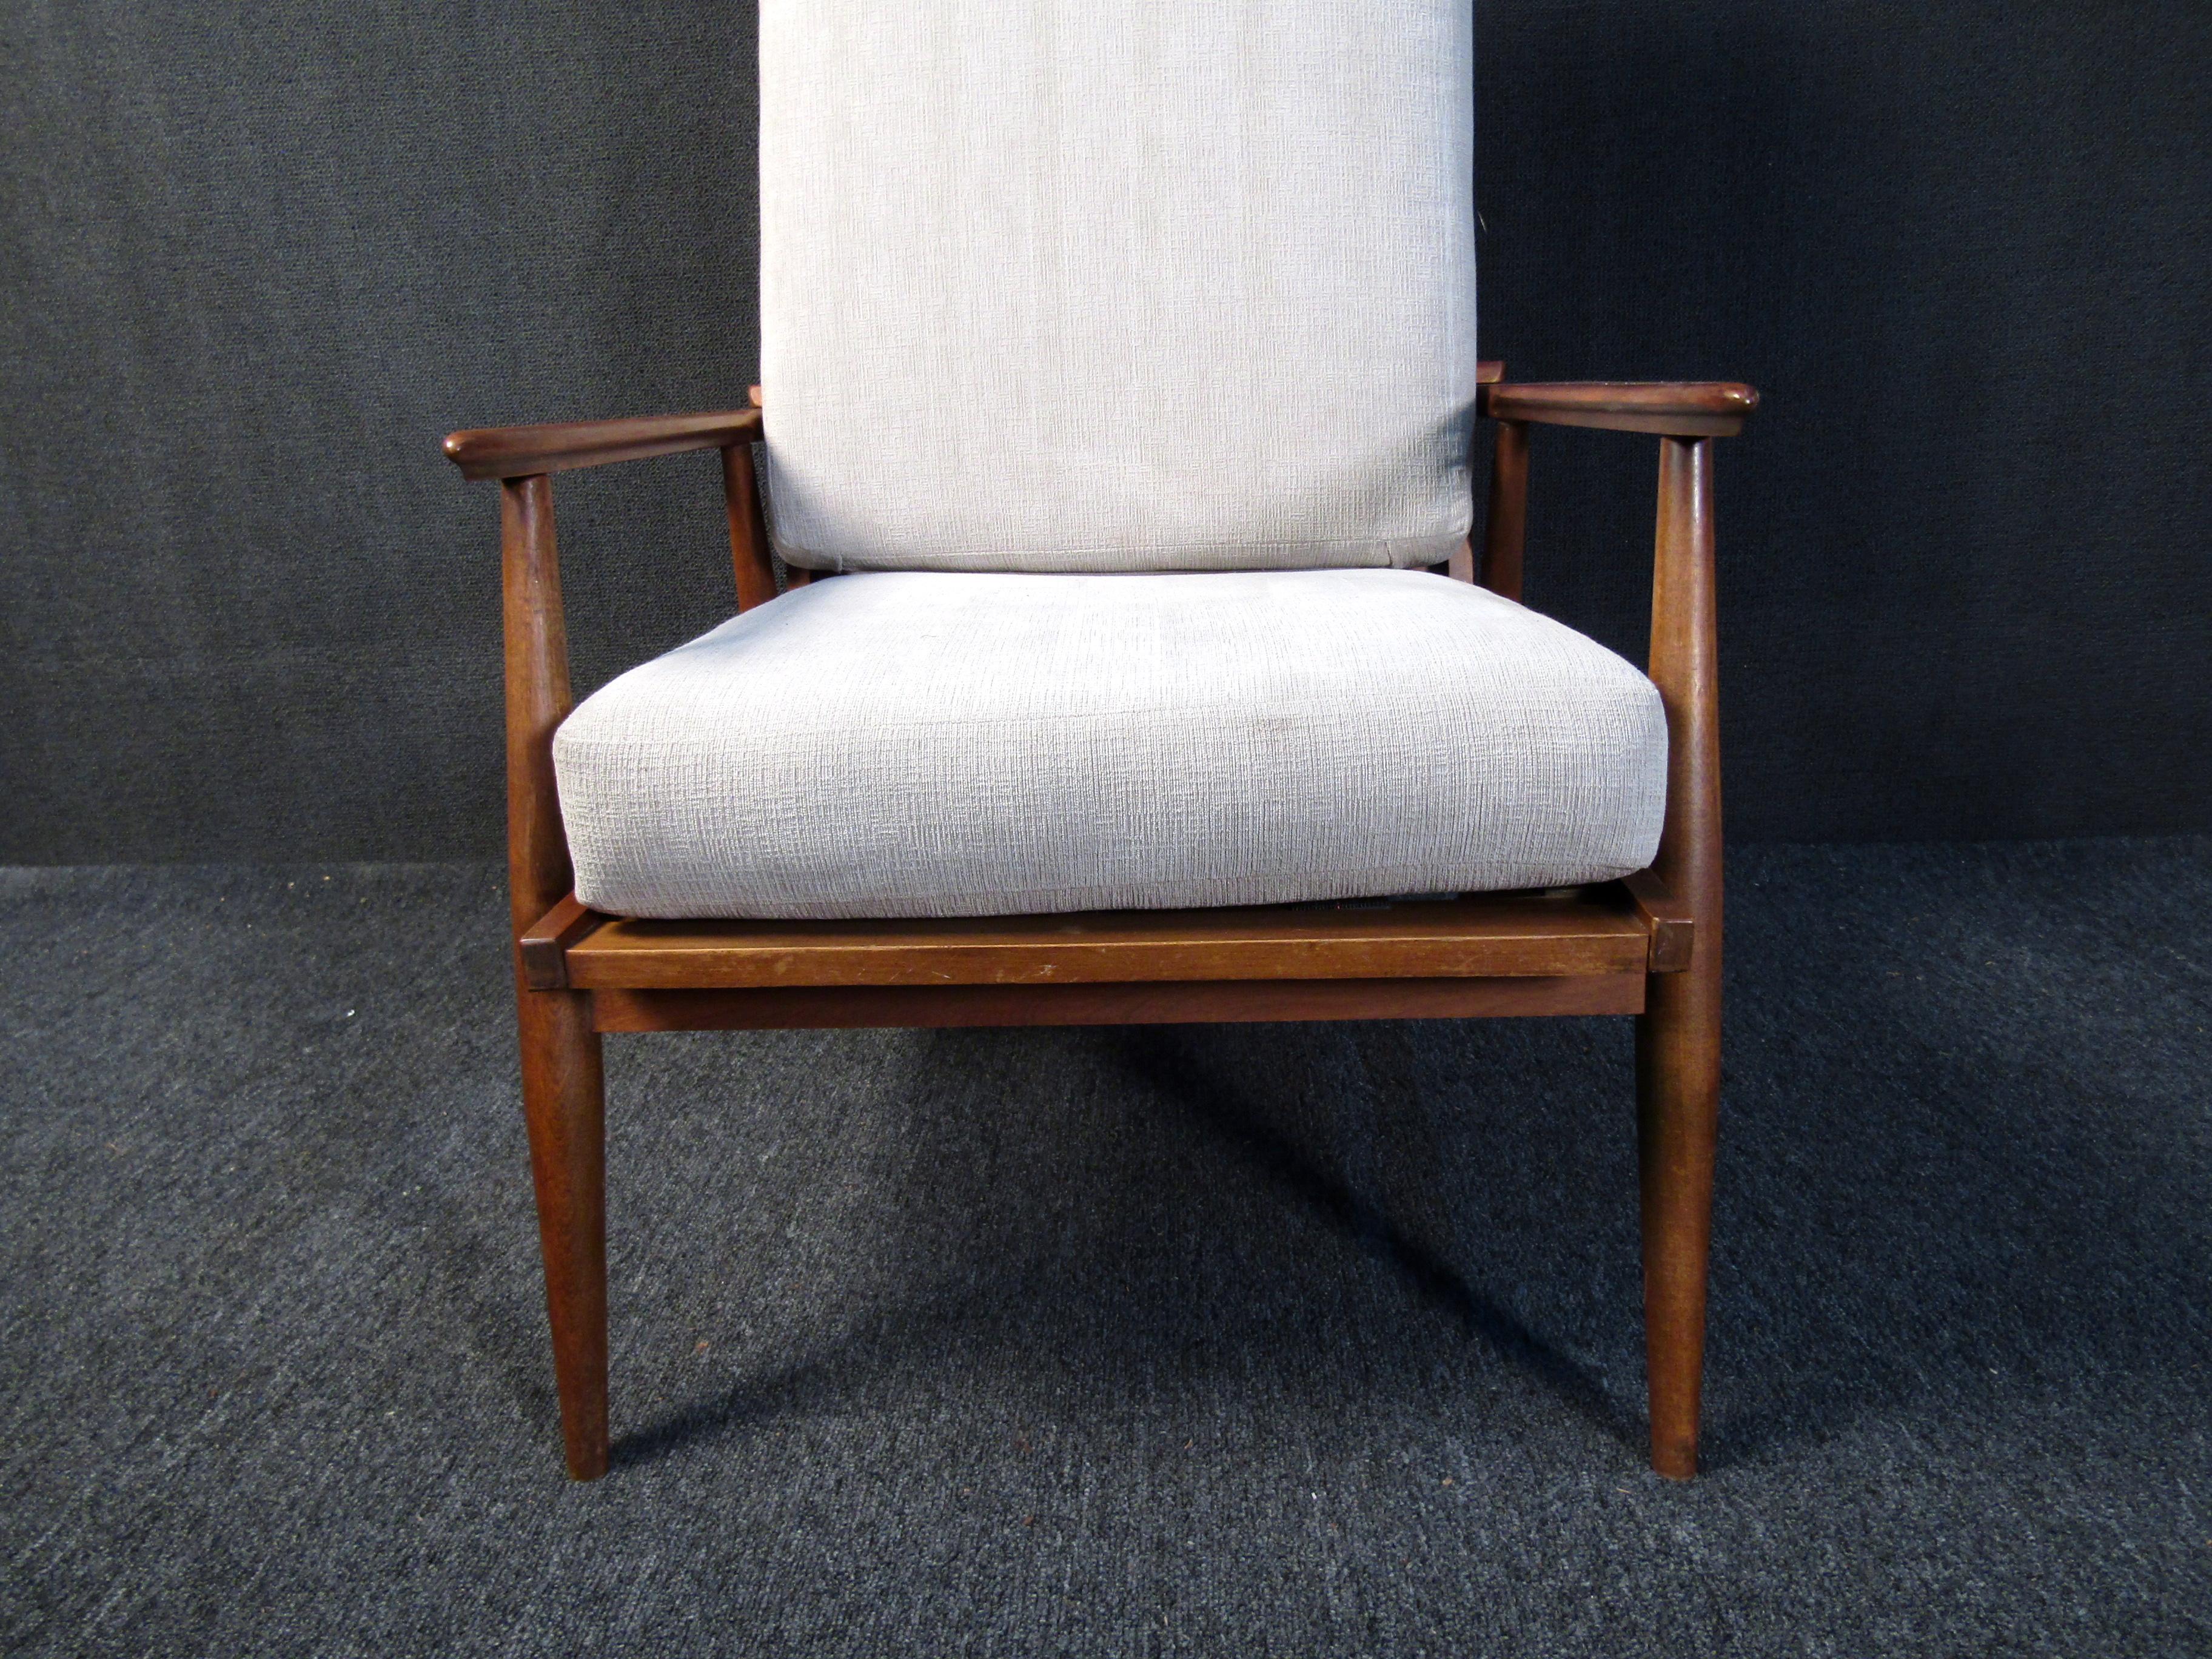 This vintage armchair combines Mid-Century Modern style with quality materials and comfortable design. Upholstered cushions, a reclining back and a sleek walnut frame make this chair a unique choice for any reading corner or sitting room. Please